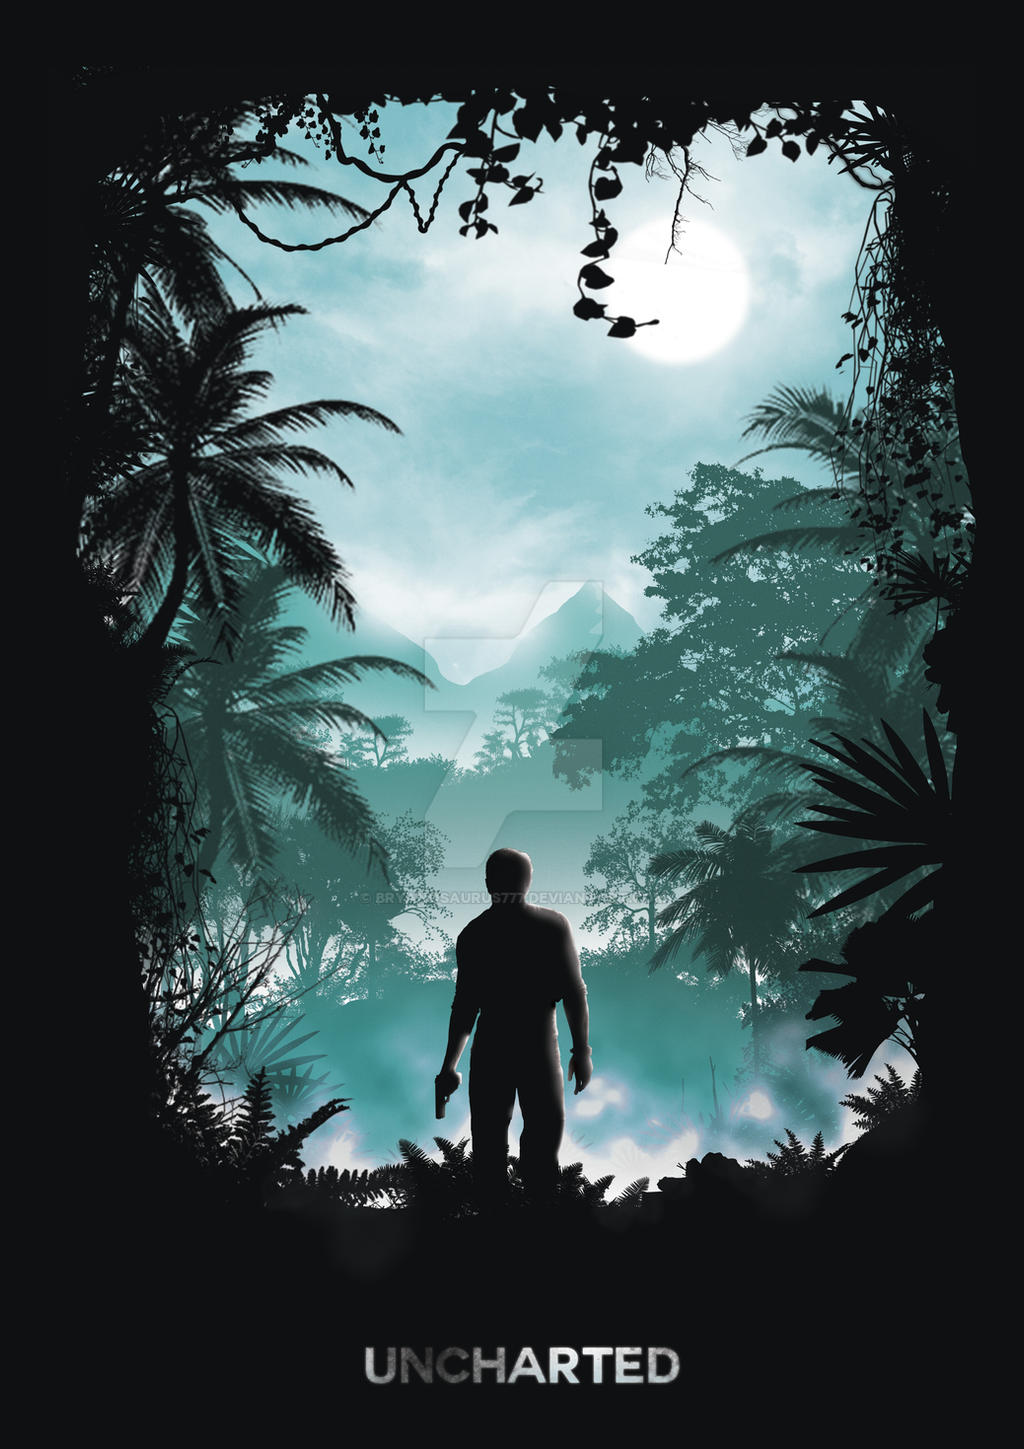 Free download Uncharted by FireCouch [843x1280] for your Desktop, Mobile & Tablet. Explore Uncharted Minimalist Wallpaper. Uncharted Wallpaper HD, Uncharted Wallpaper, Uncharted 4 Wallpaper